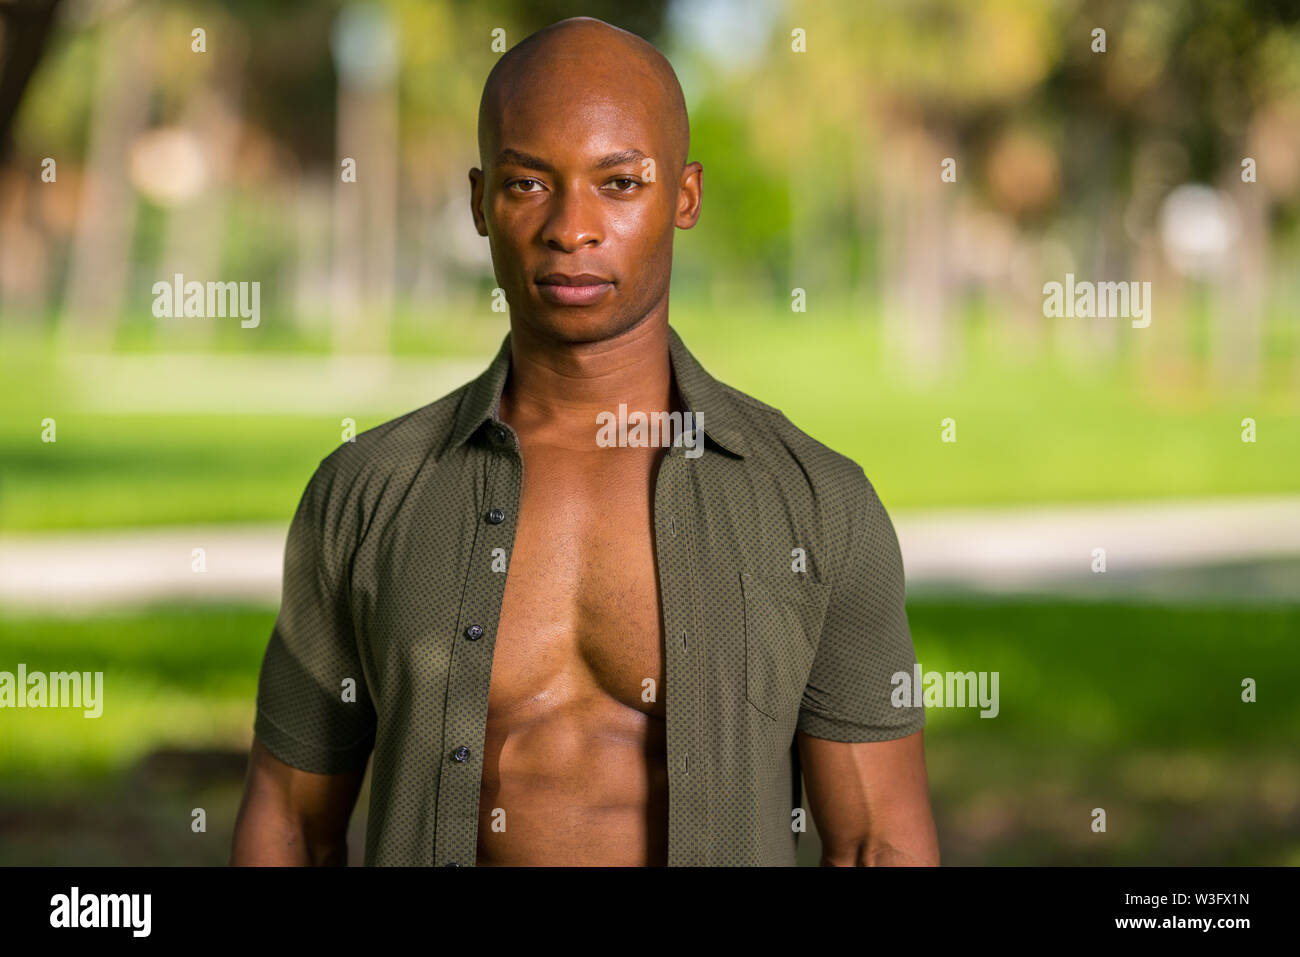 Portrait of an attractive bald young black man with shirt unbuttoned to show muscular chest Stock Photo